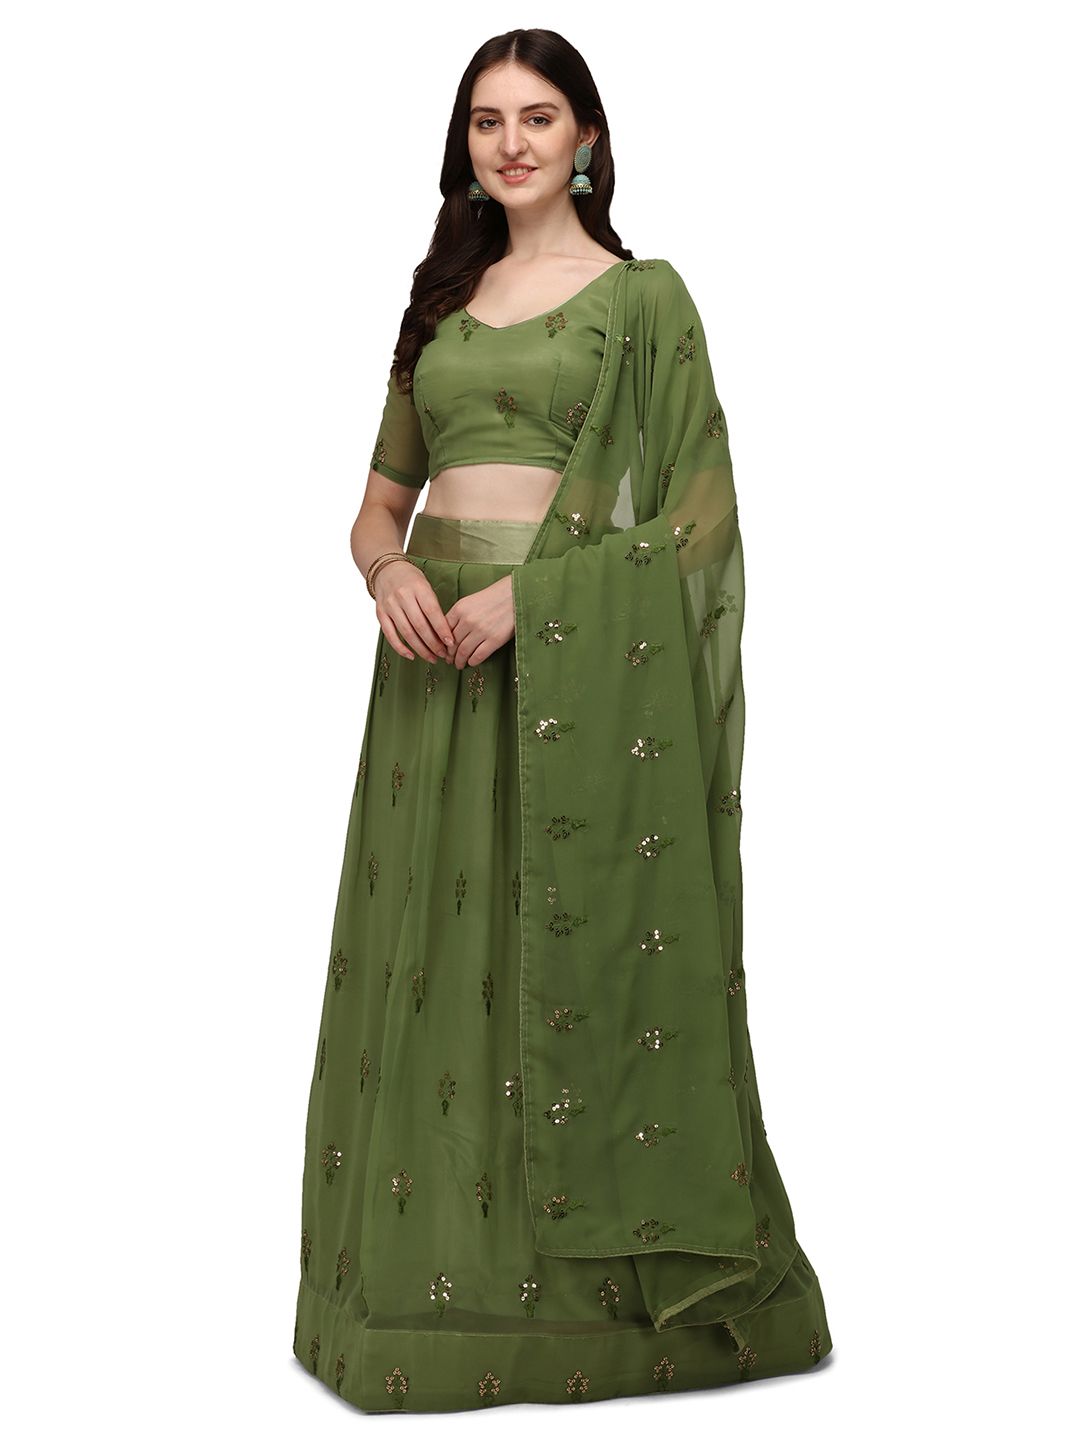 Pratham Blue Green Embellished Sequinned Semi-Stitched Lehenga & Unstitched Blouse With Dupatta Price in India